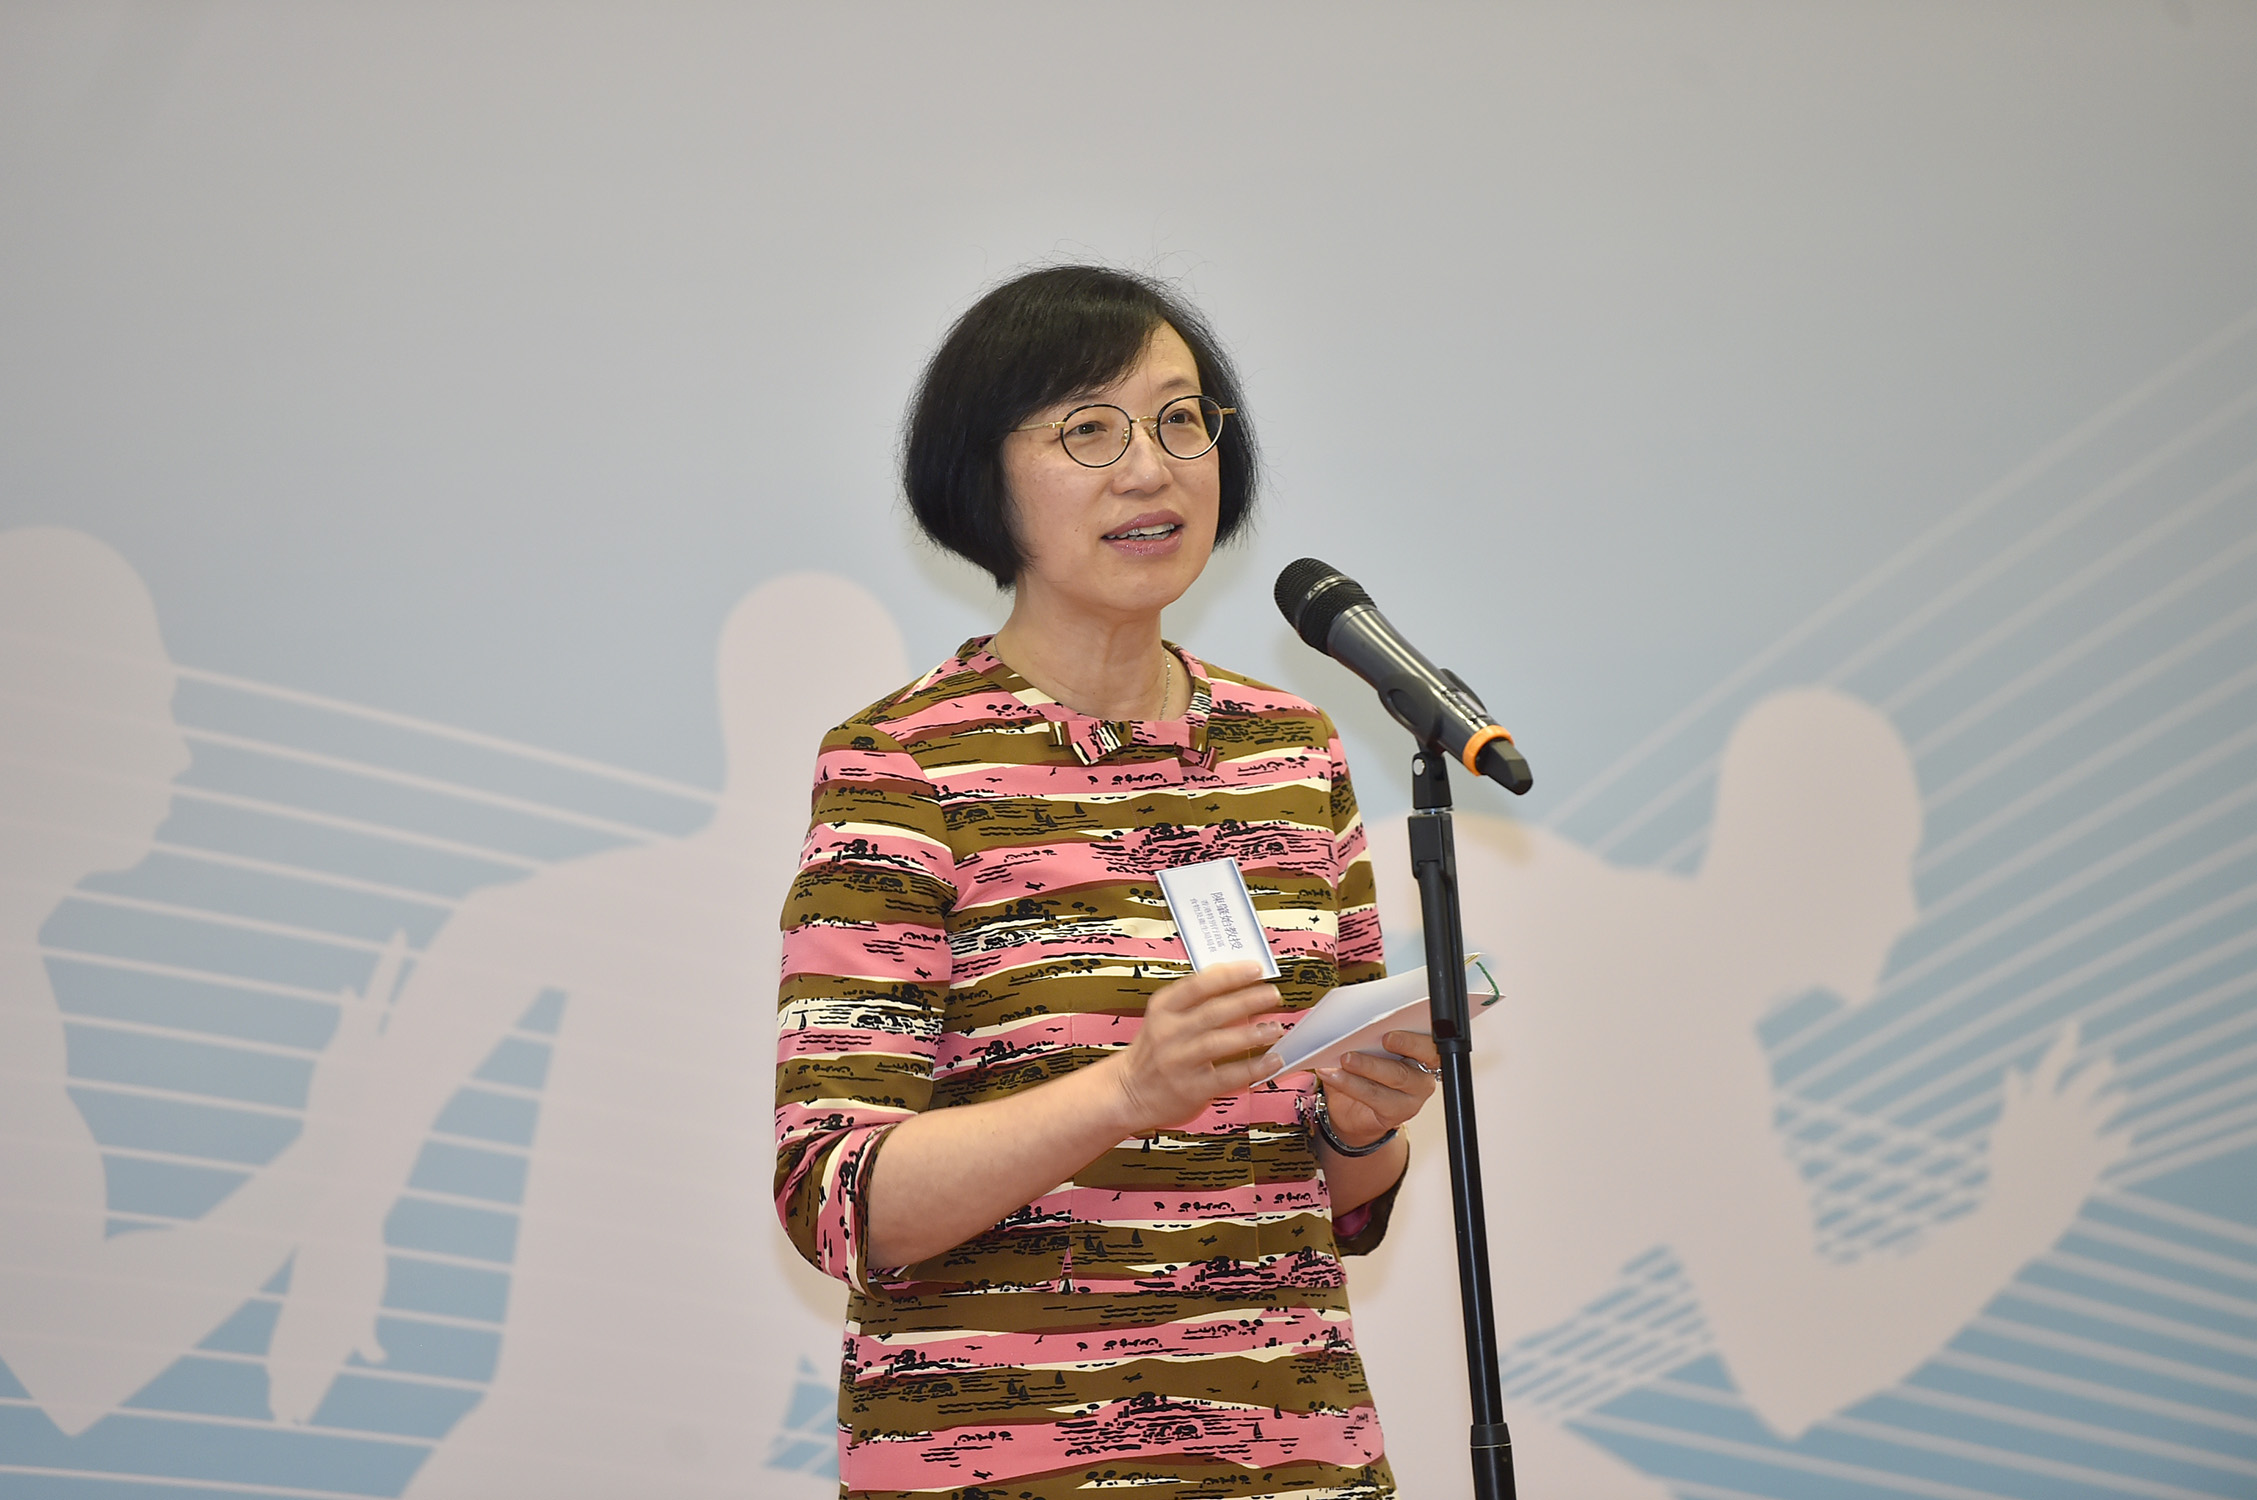 Professor Sophia CHAN remarks that the overweight and obesity problems among Hong Kong people are alarming. She encourages the general public to maintain a healthy diet and exercise regularly.